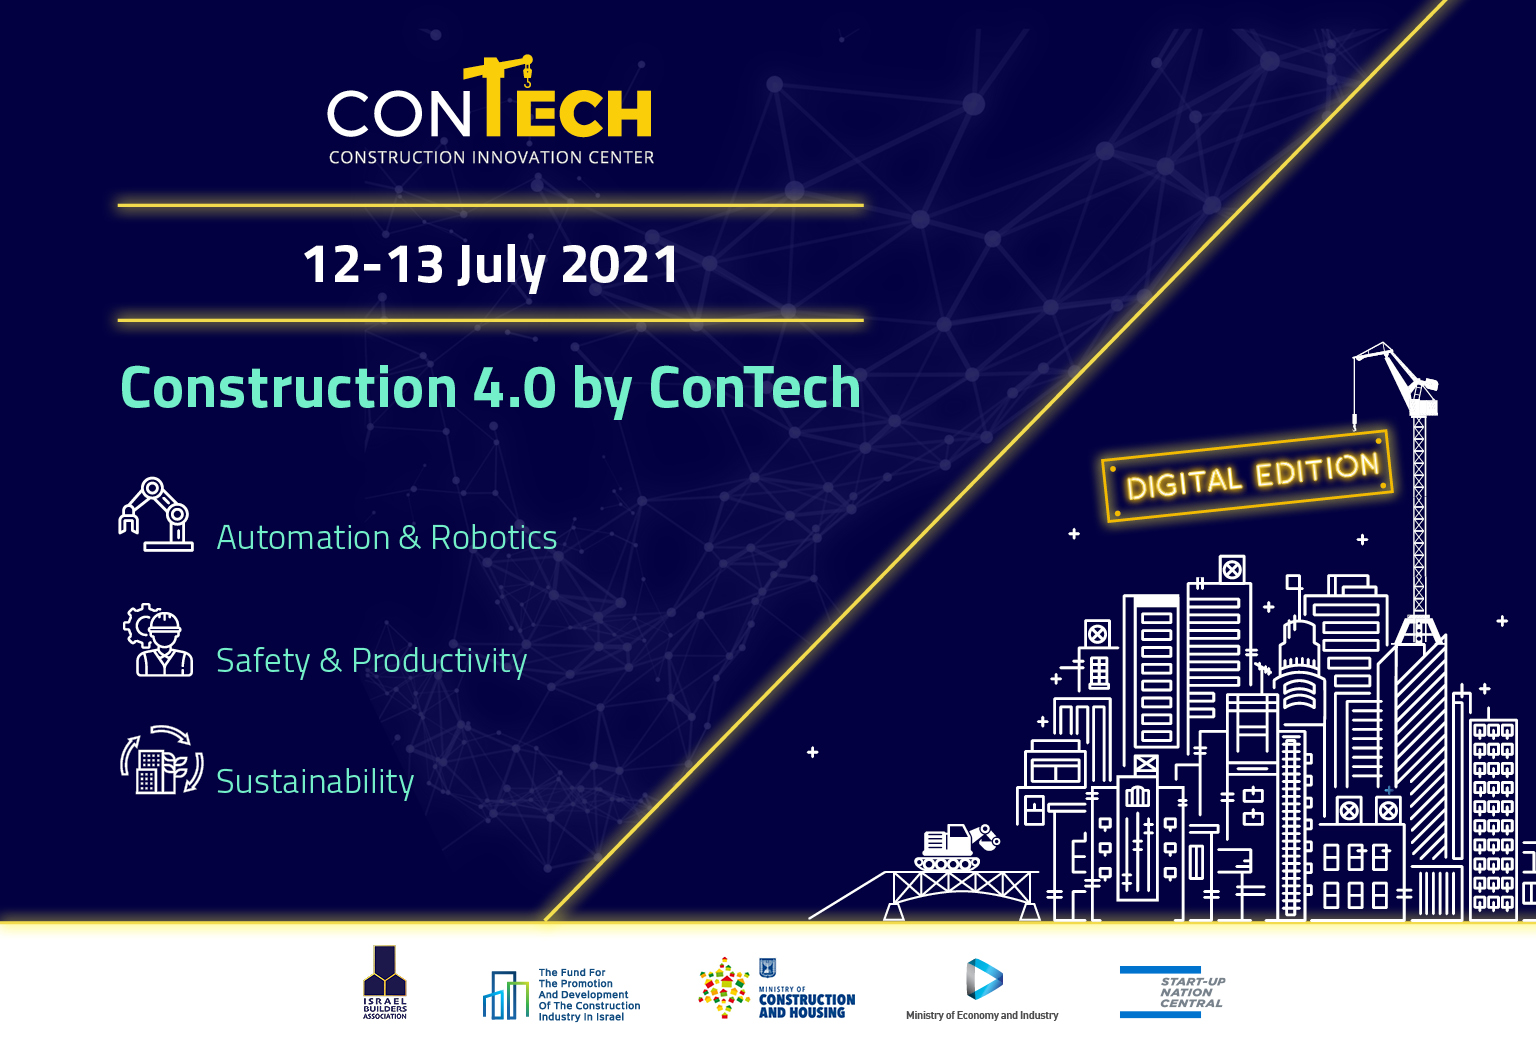 Construction 4.0 by ConTech 2021